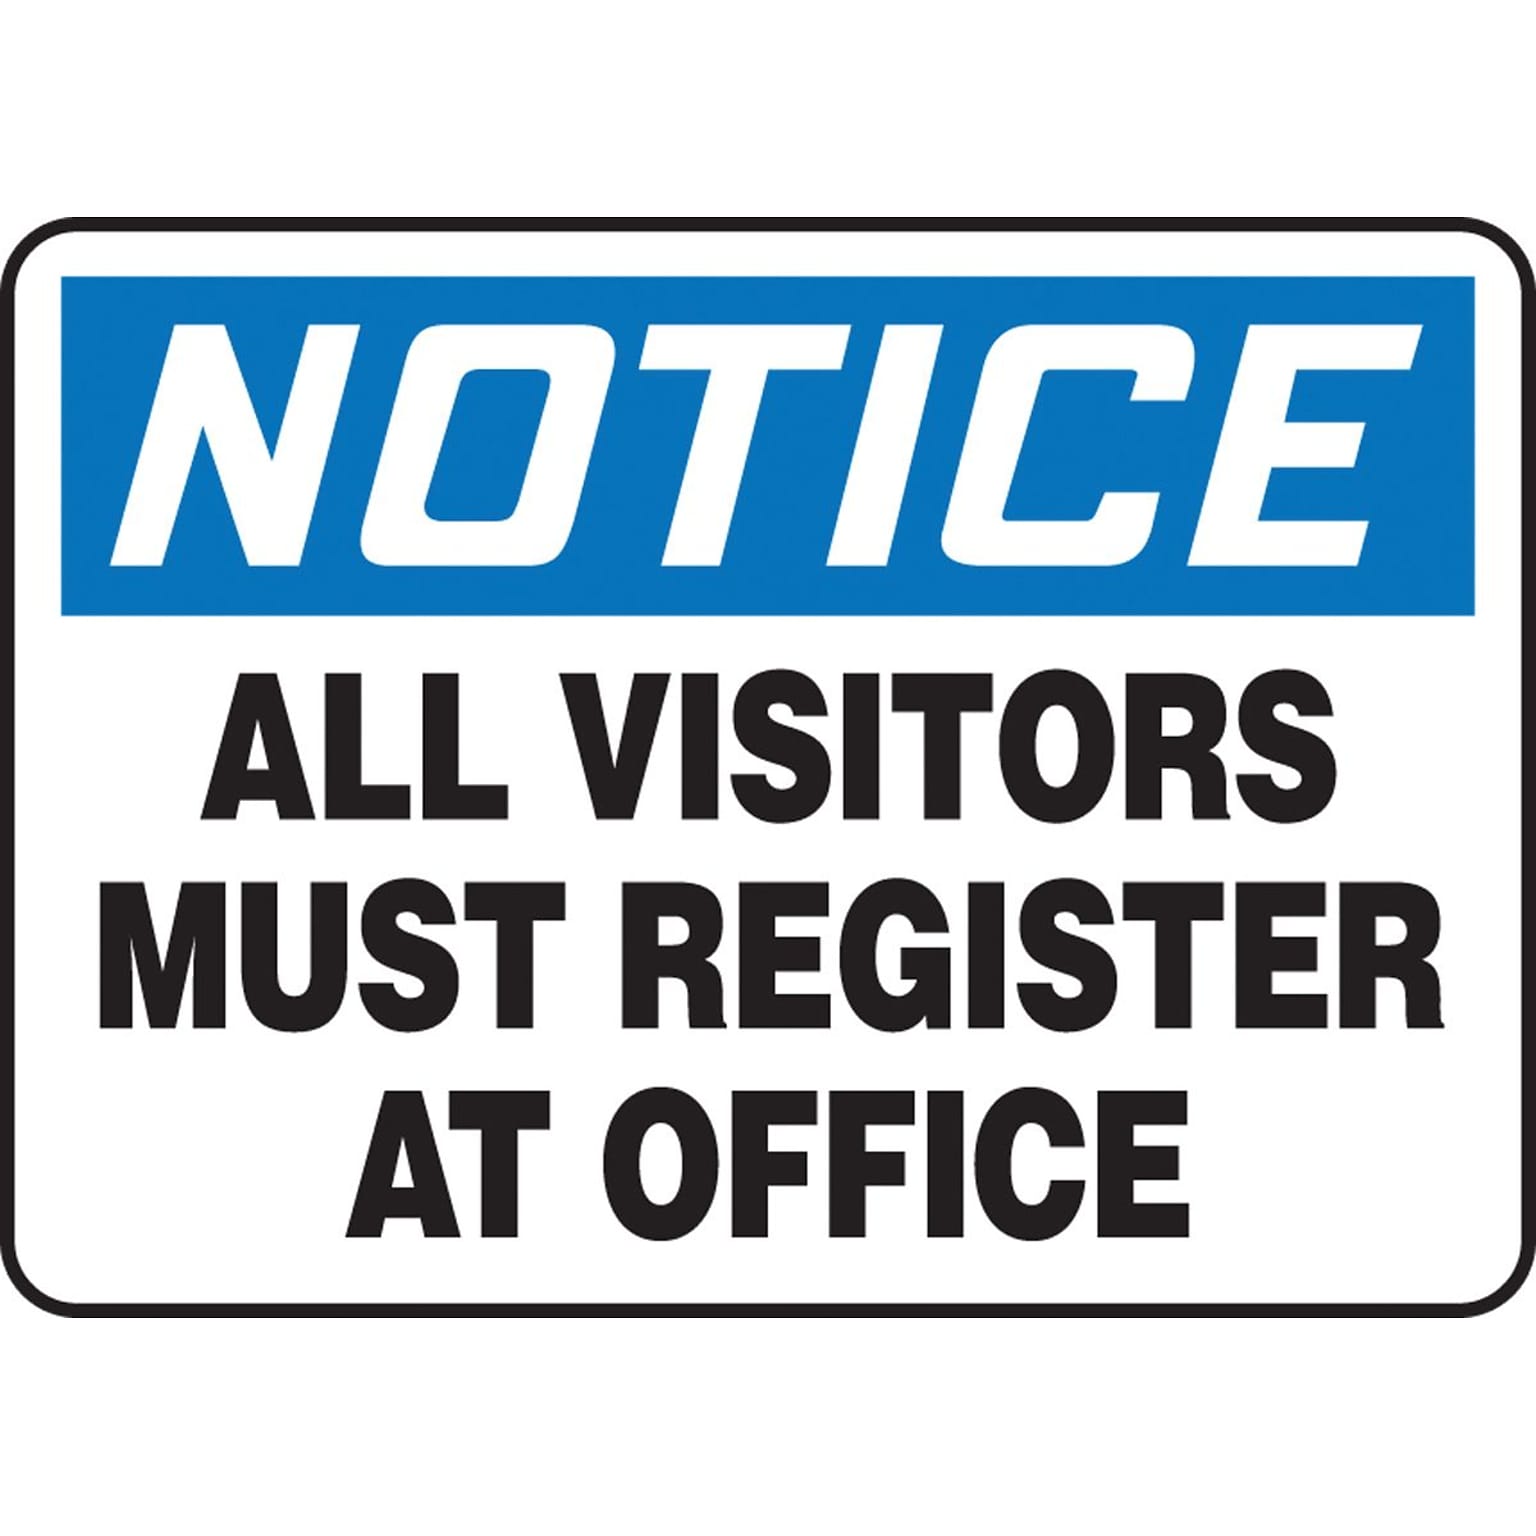 Accuform Signs® 10 x 14 Plastic Safety Sign NOTICE ALL VISITORS MUST.., Black/Blue On White